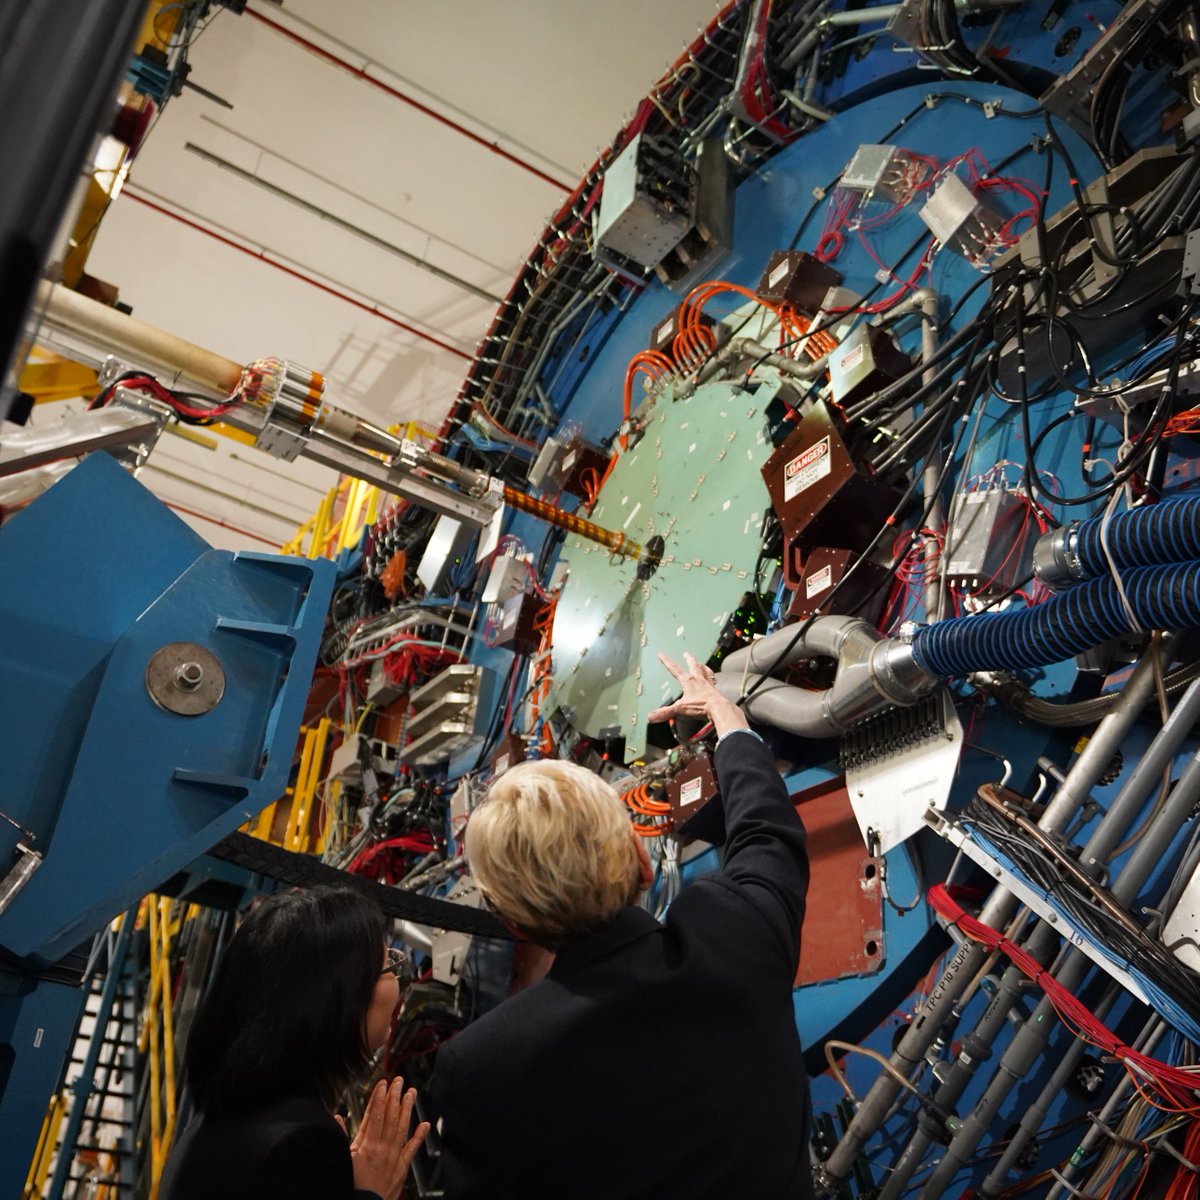 The @BrookhavenLab is a leader in the study of nuclear and particle physics. The Biden-Harris Administration is investing $138 million to expand the lab's one-of-a-kind Electron Ion Collider, which could unravel the secrets of the proton and how we view energy as we know it.